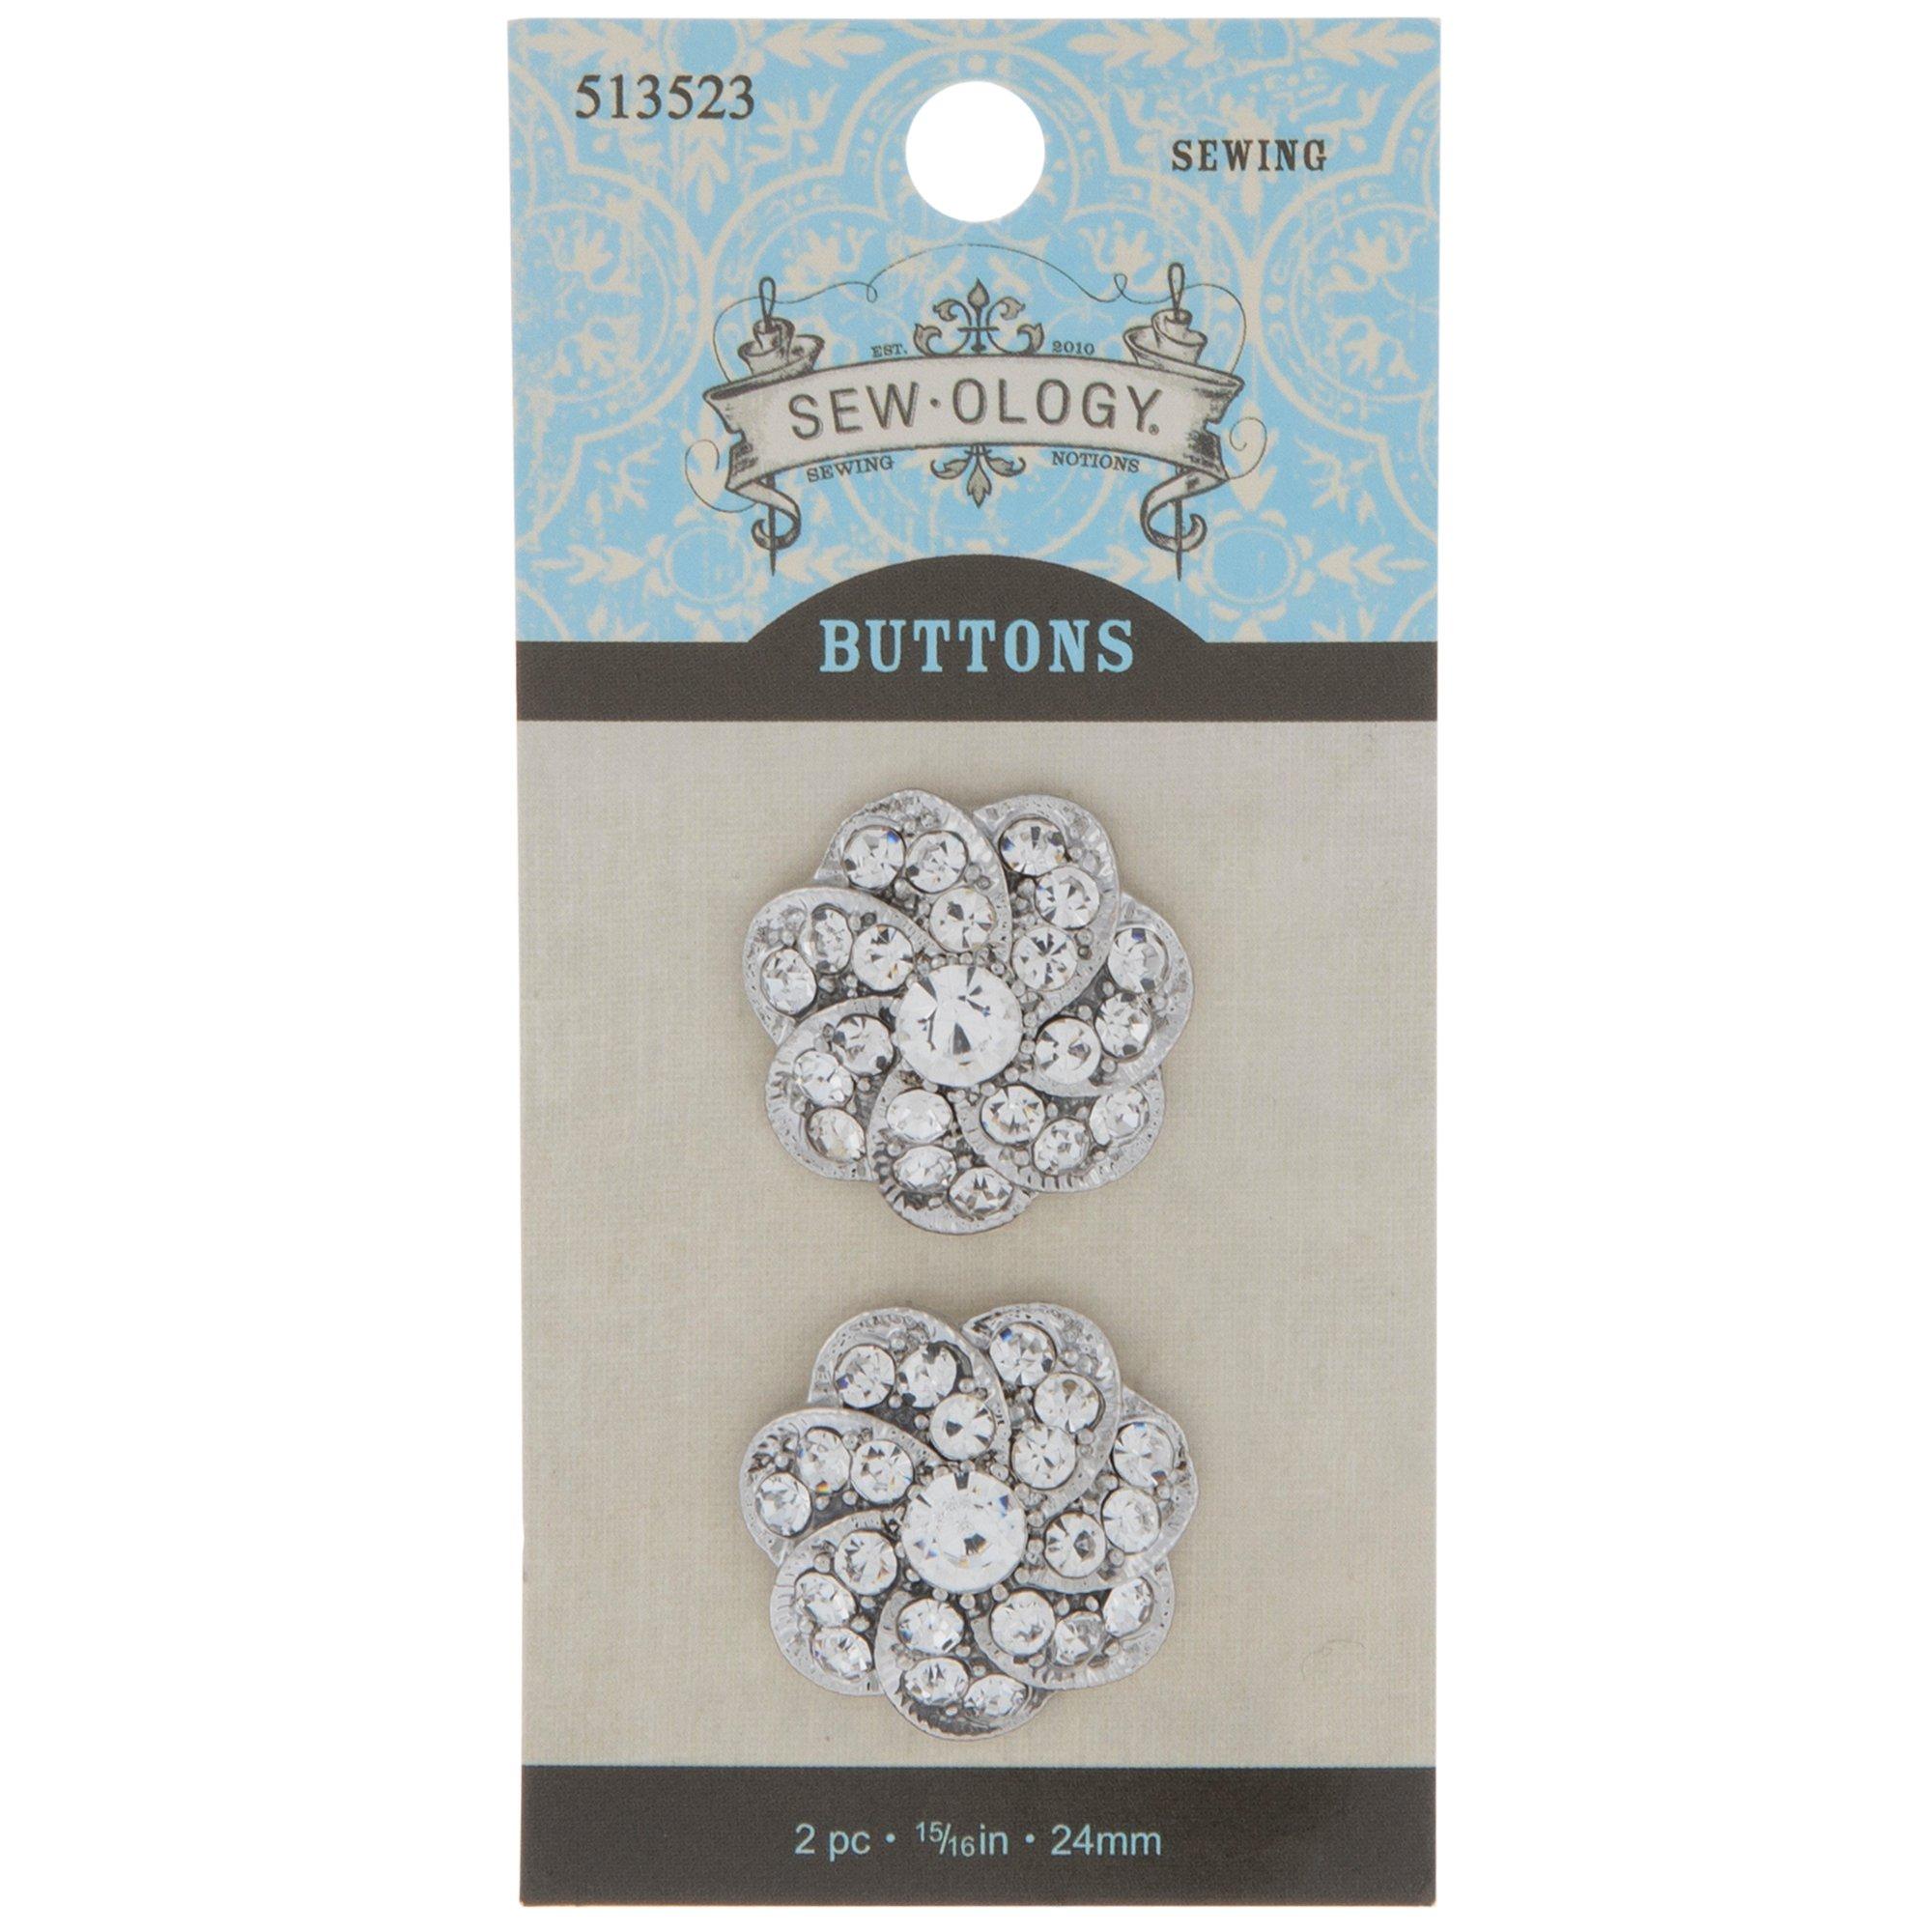 10 Pieces Rhinestone Buttons Sew On for Sewing Scrapbooking